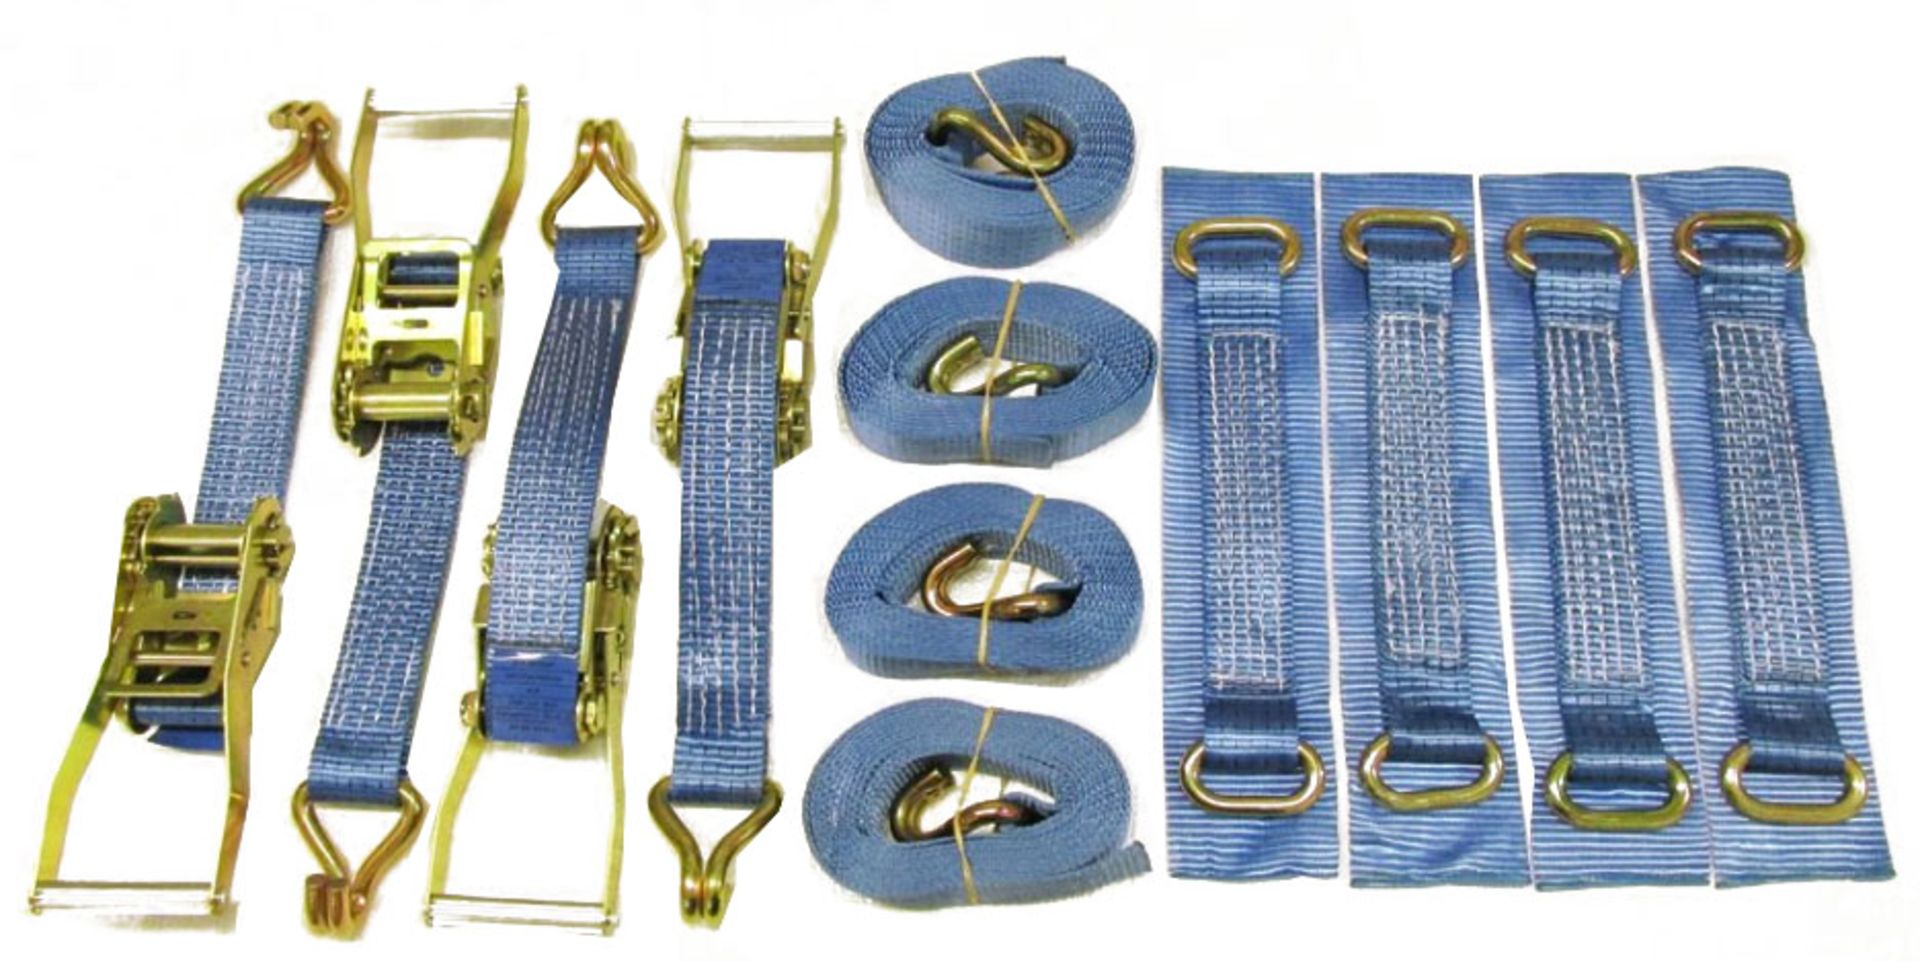 20 X PACK OF 4 - 35MM X 4 METRE RATCHET LASHINGS WITH CLAW HOOK AND 4 ROUND SLING STRAPS (RLPACK35)